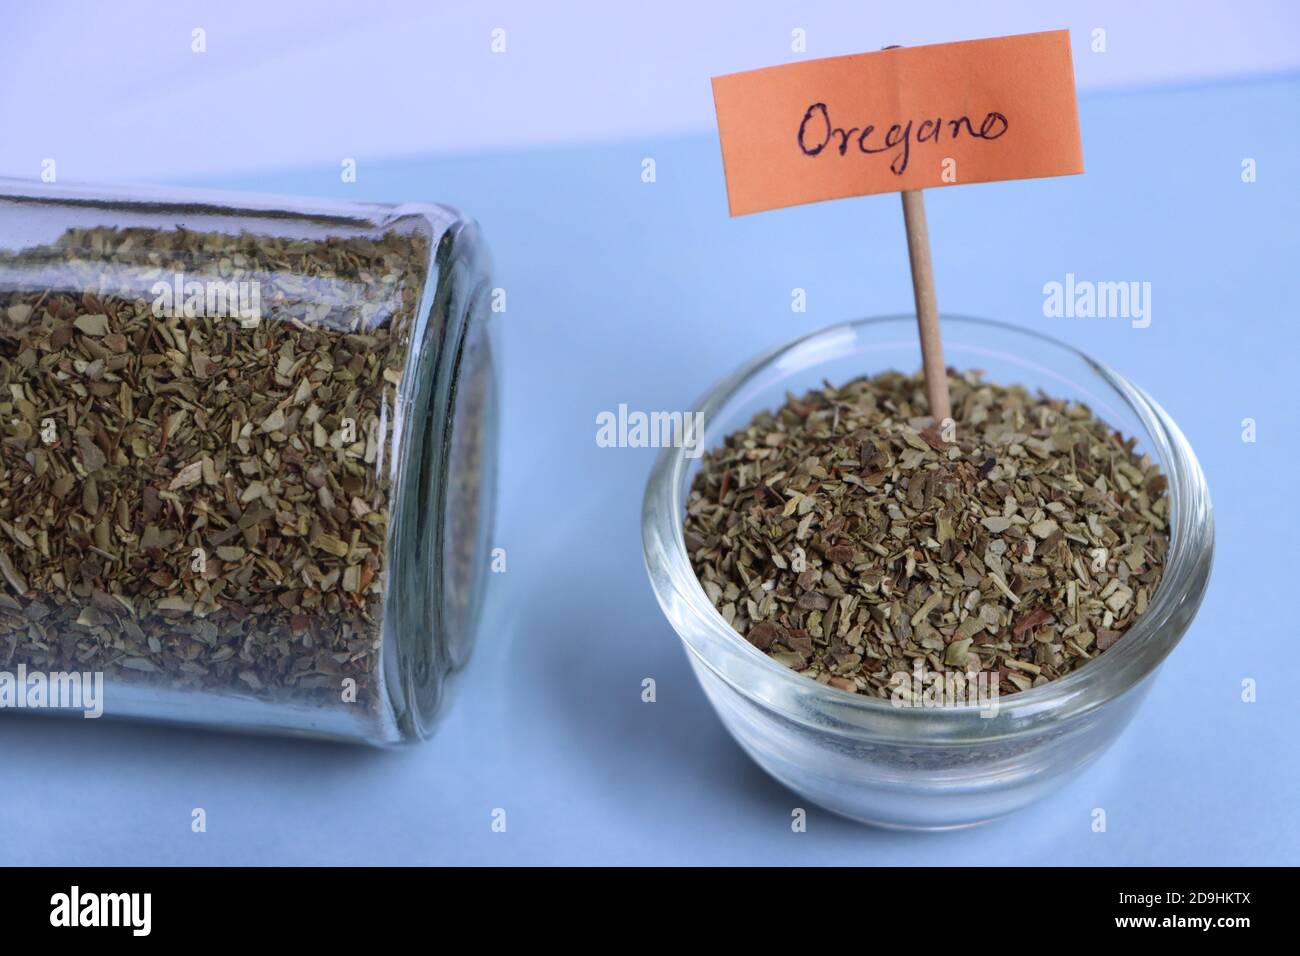 Oregano dry herb, Sweet Marjoram, Oreganum, used add flavor to various dishes and to treat health conditions Stock Photo